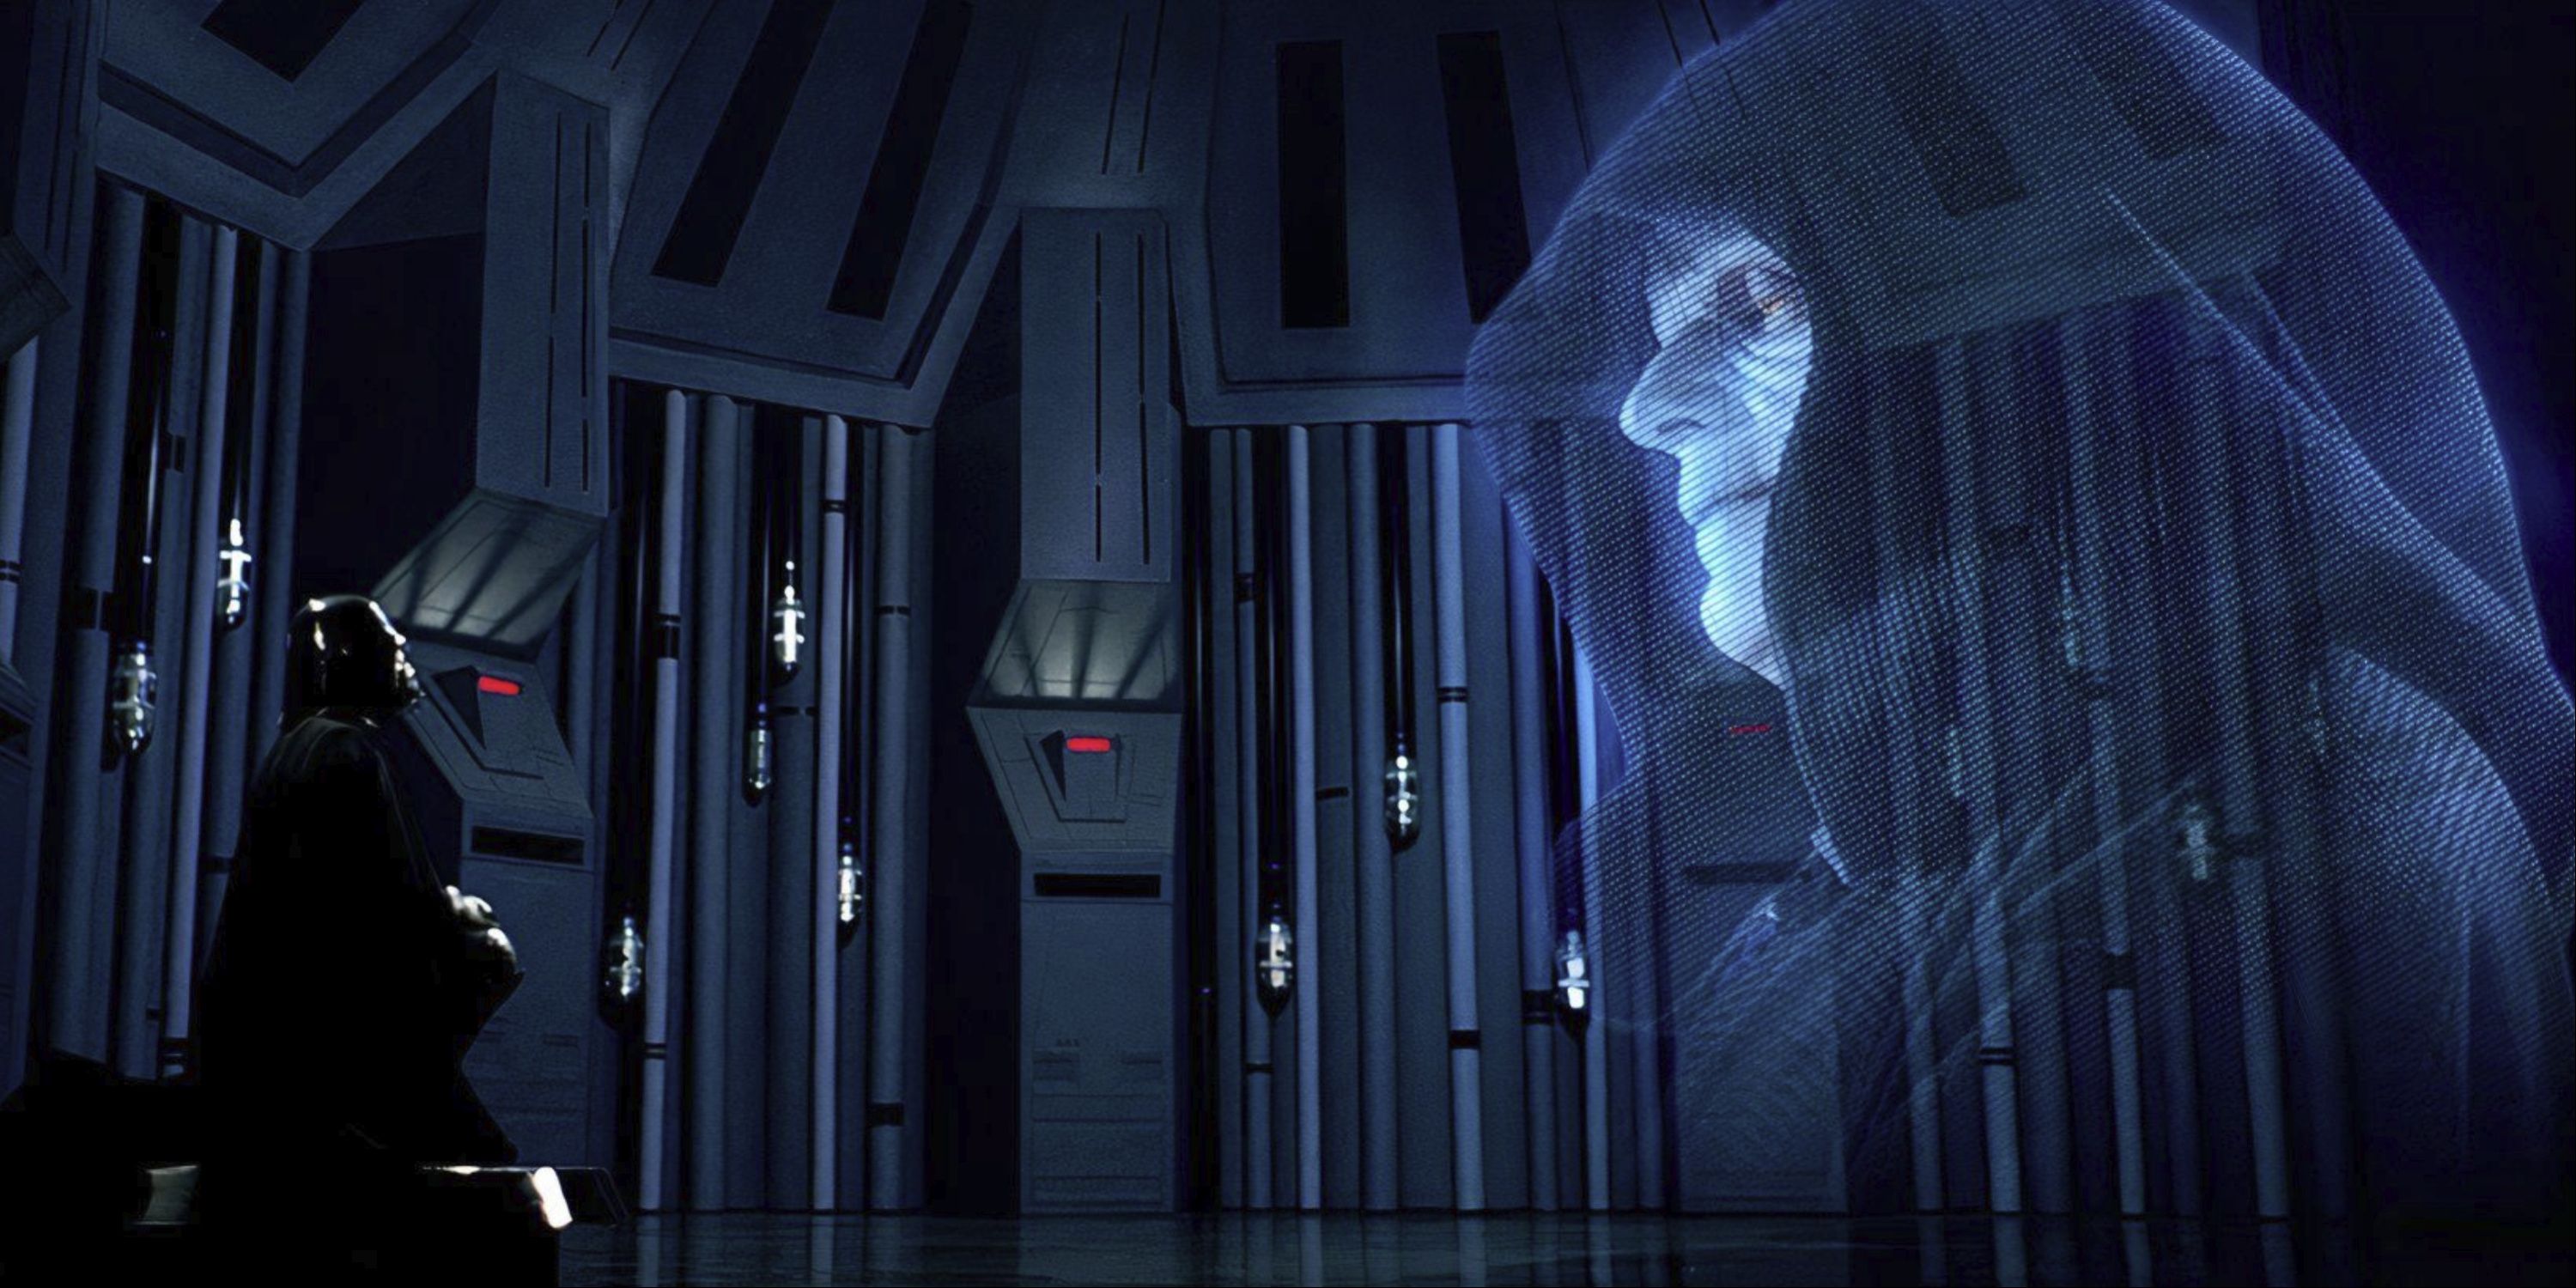 A massive hologram of the Emperor looms largely over Darth Vader